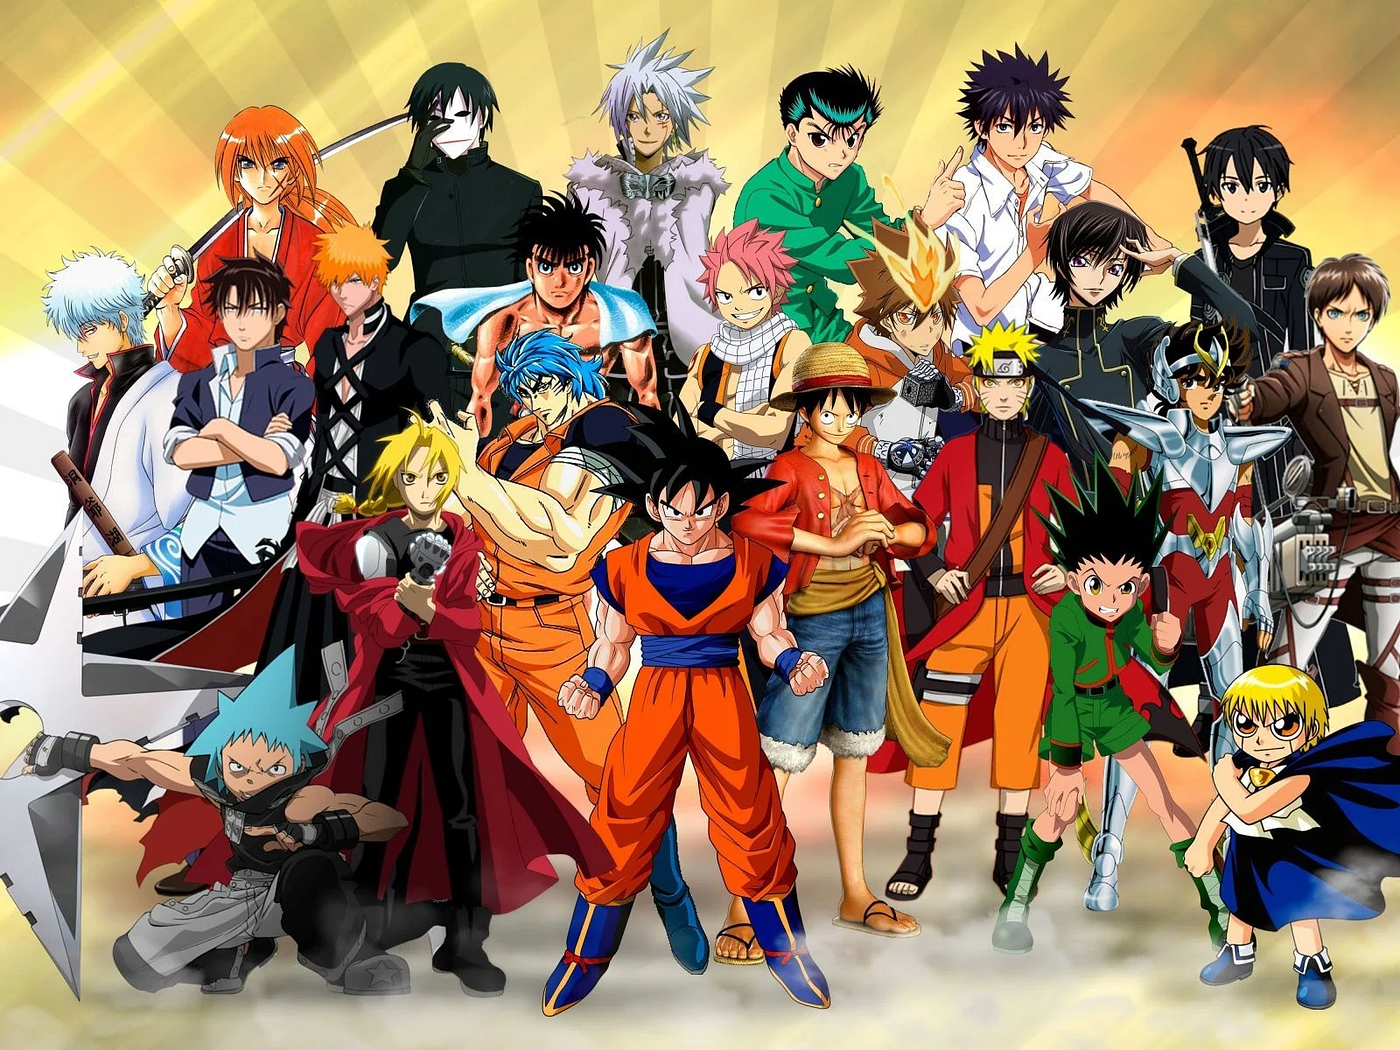 10 Most Popular Anime Characters Of All Time